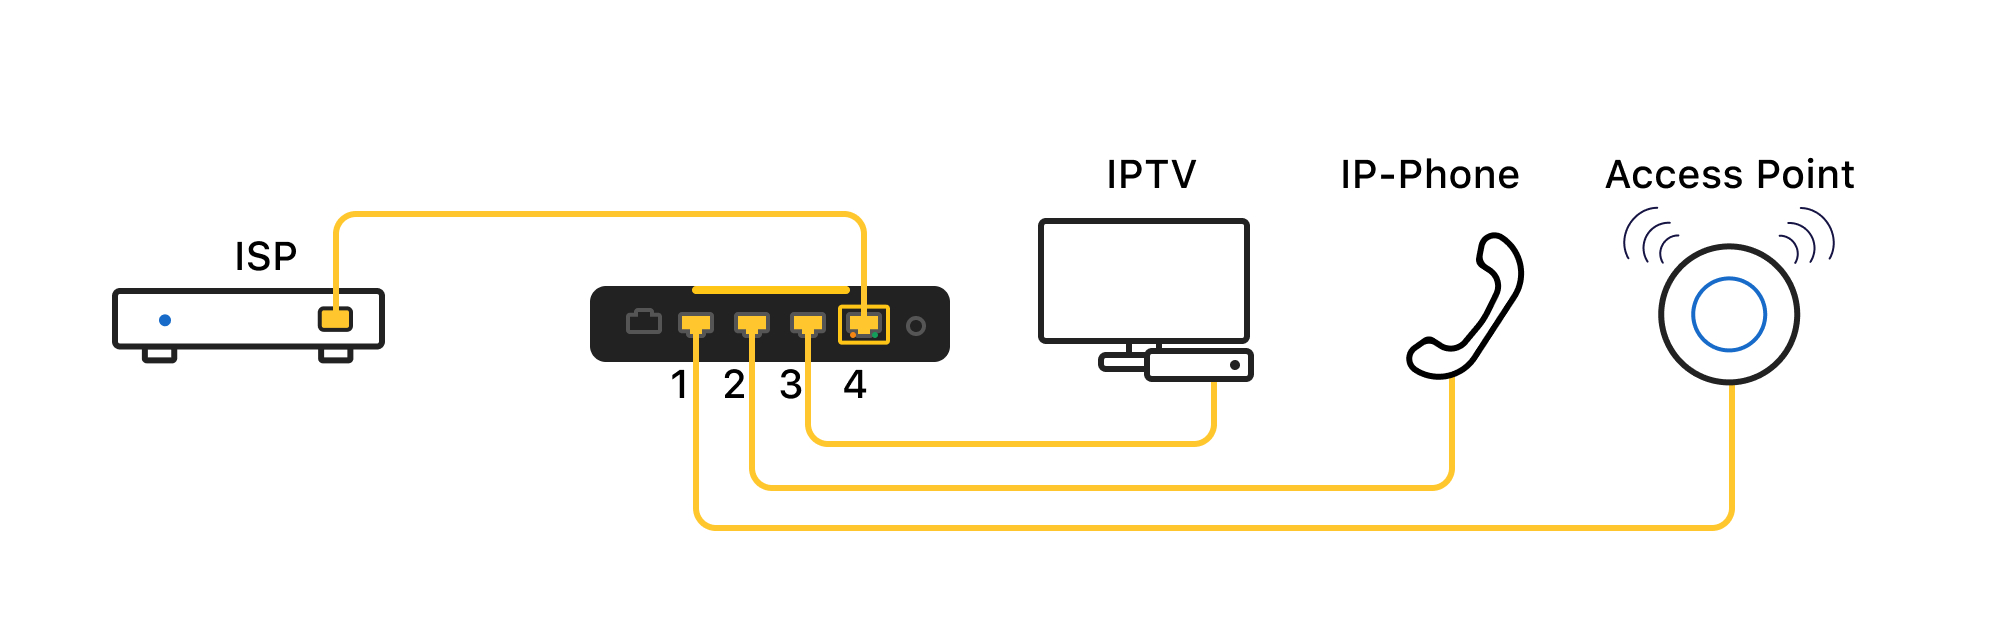 Firewalla Gold with set up VLANs for IPTV, Phone, and Access Points